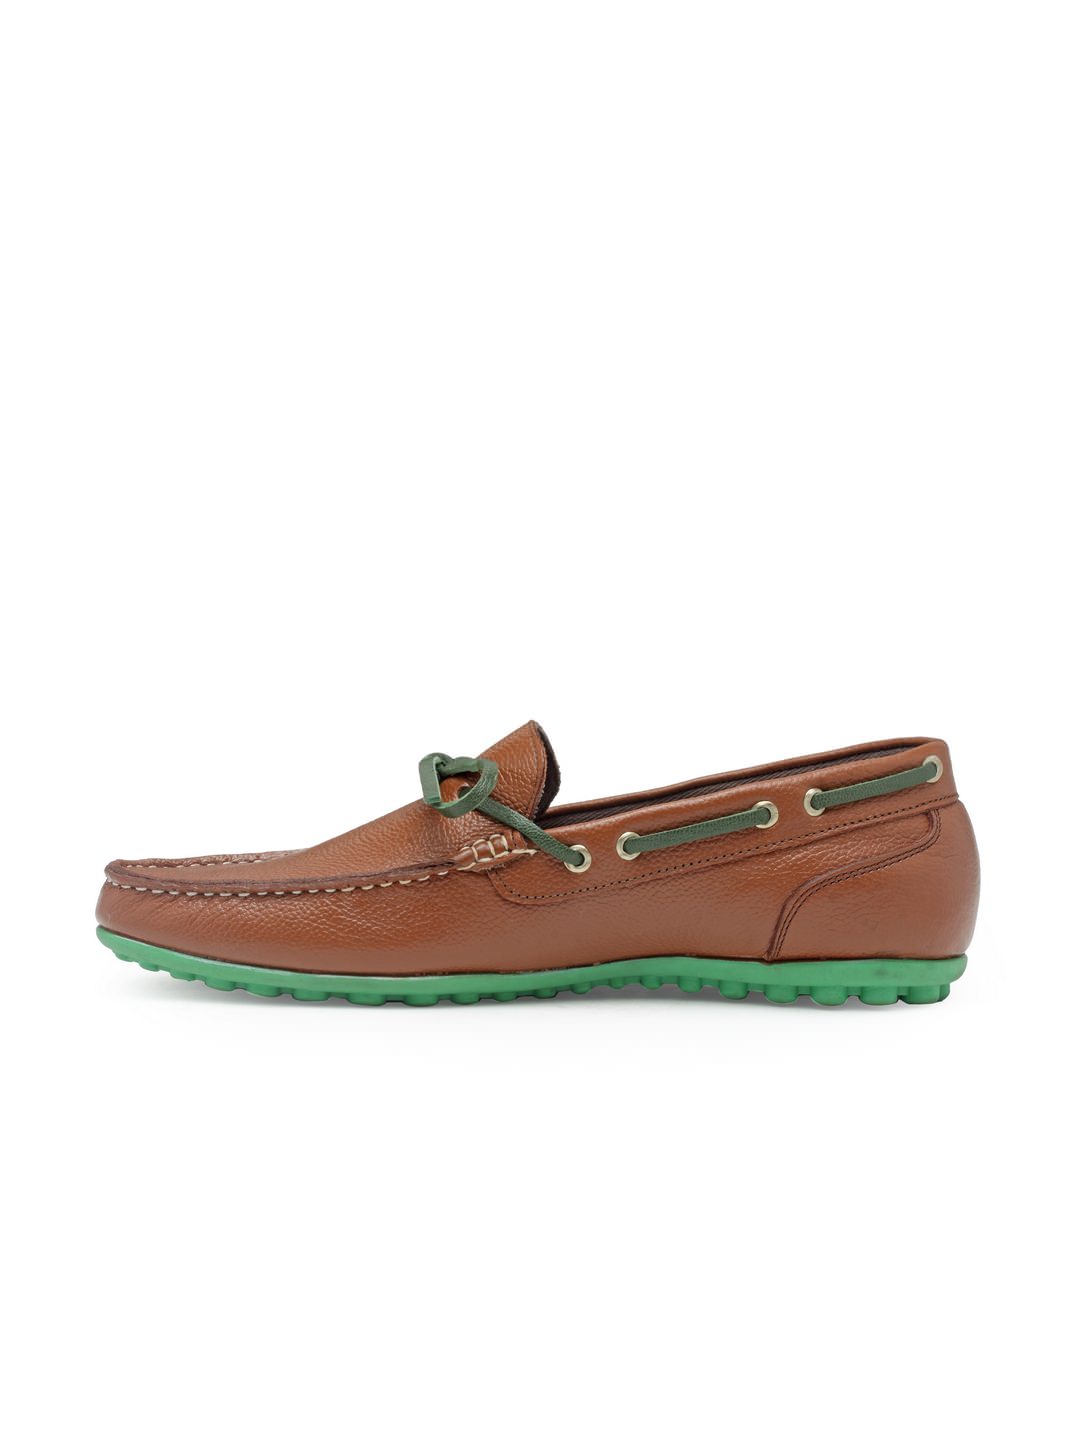 GENUINE LEATHER CLASSIC TAN BOAT SHOES | HATS OFF ACCESSORIES